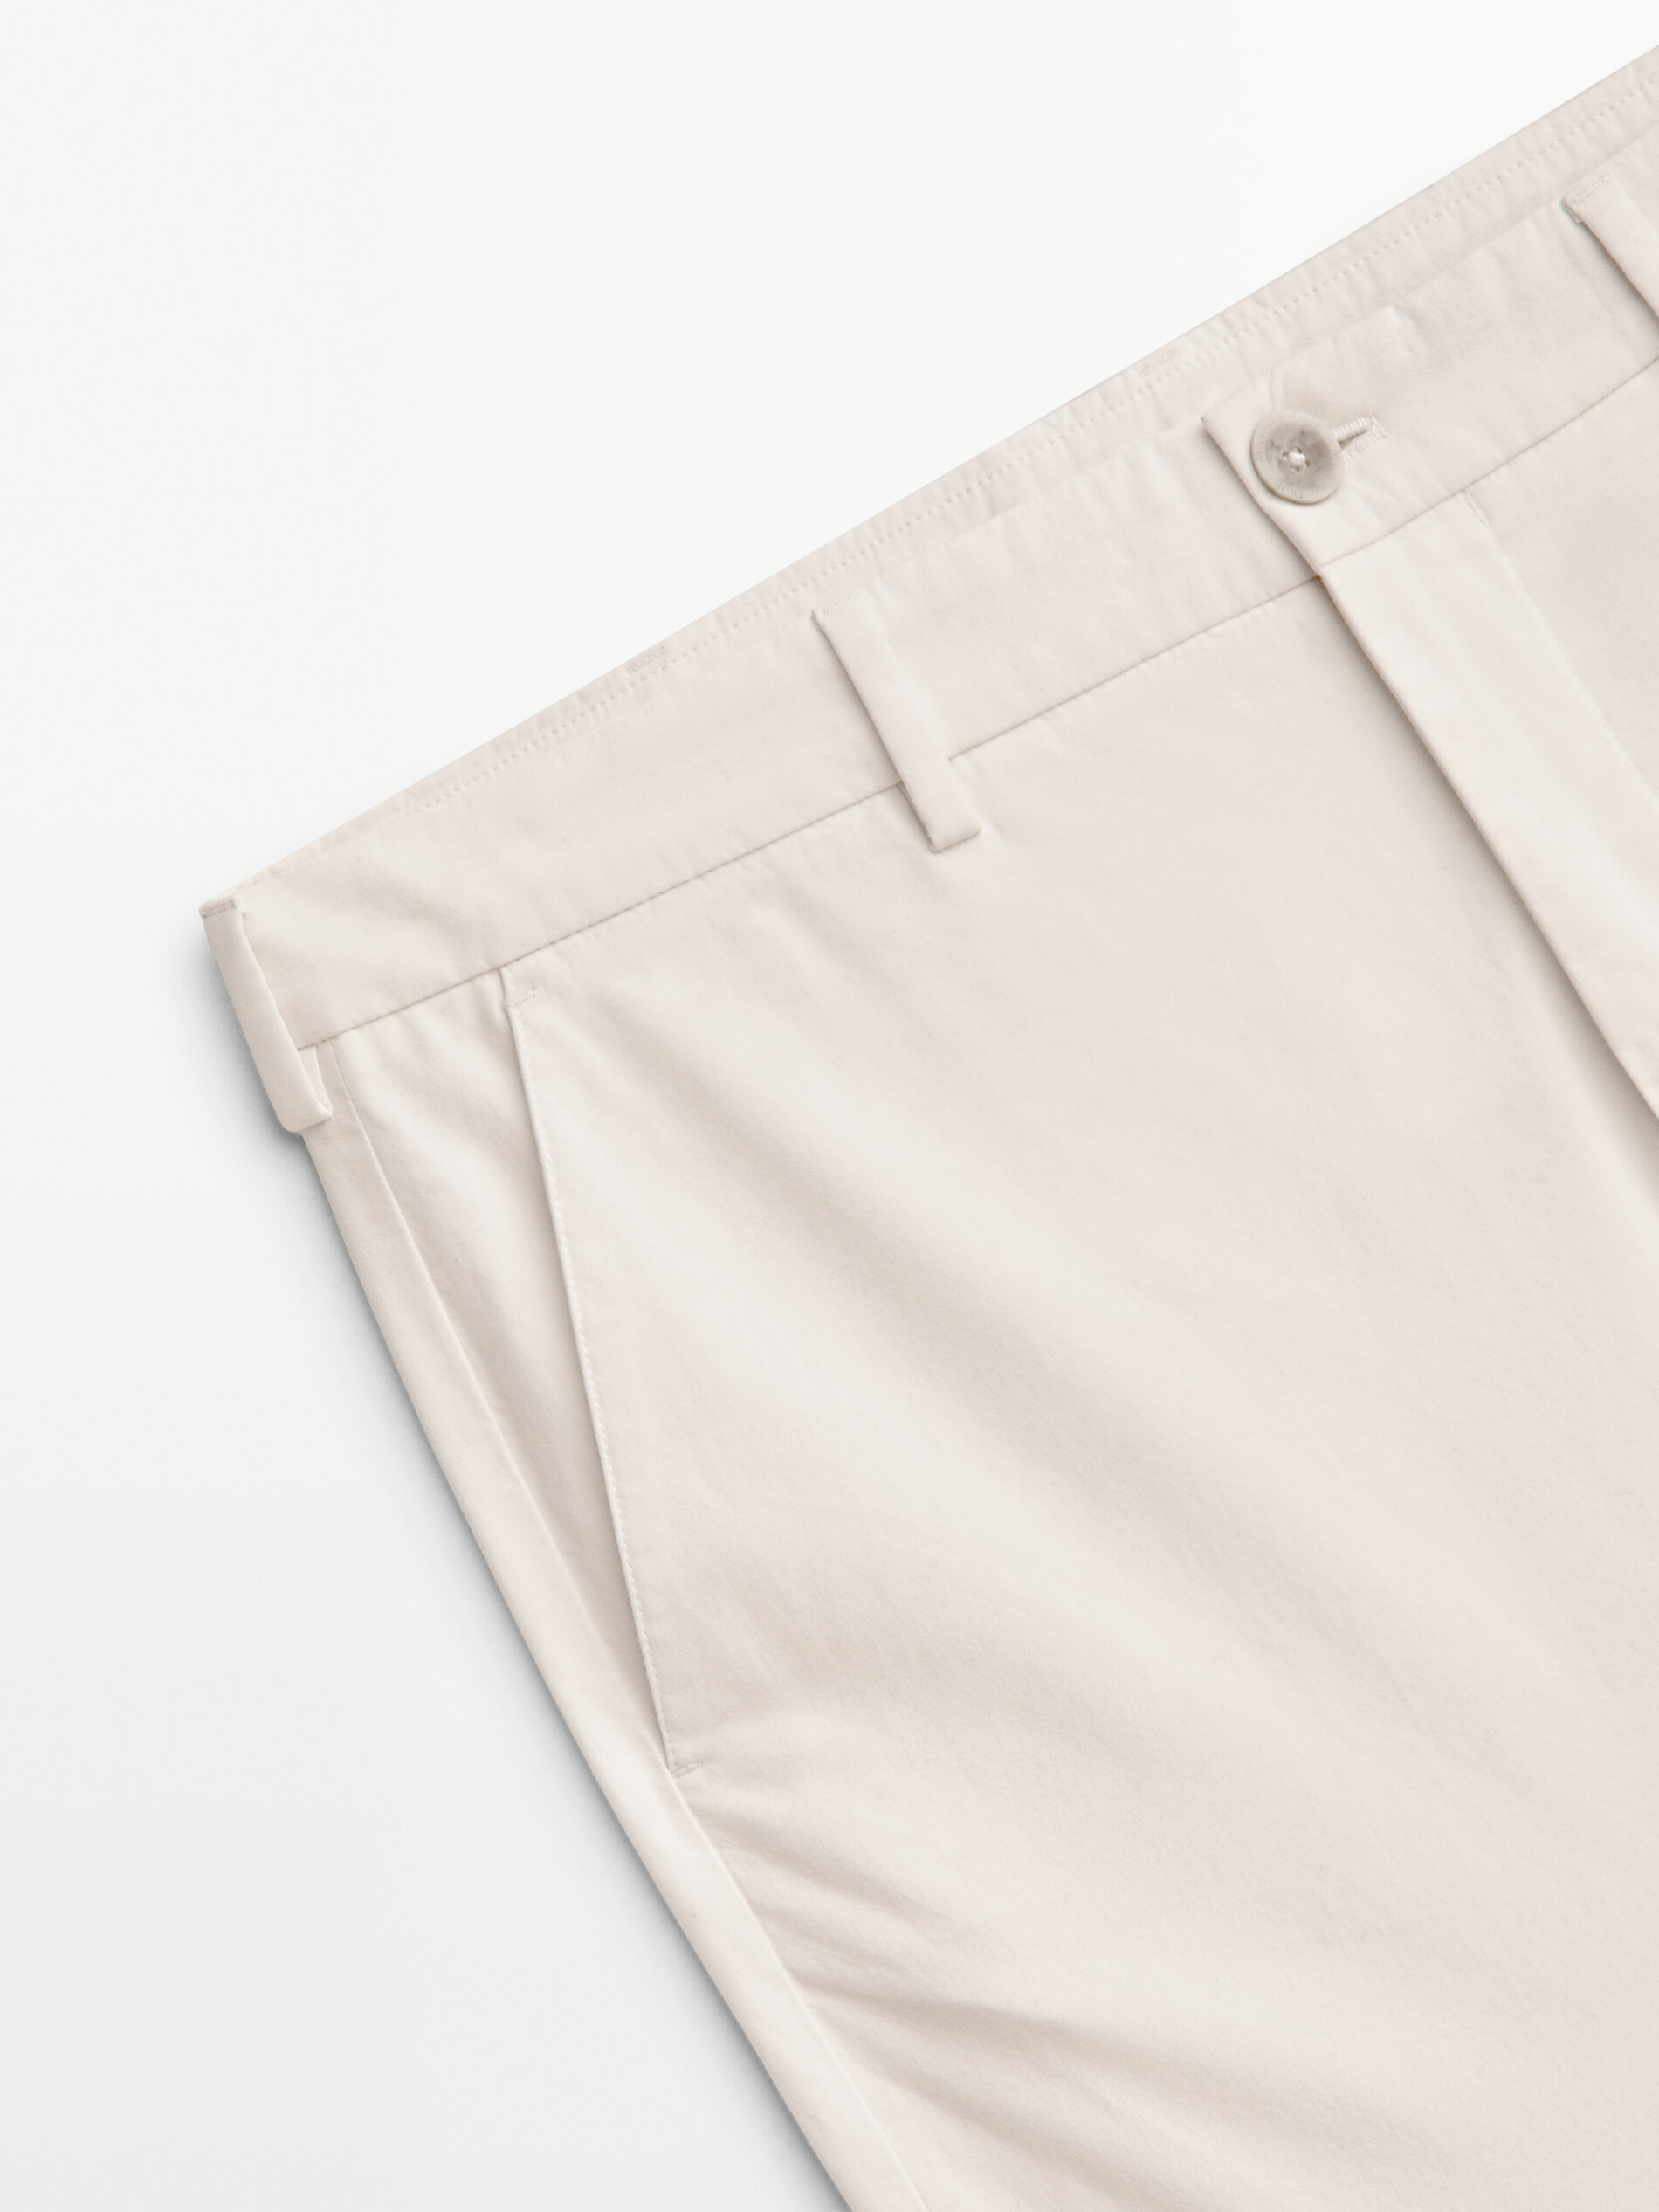 Relaxed fit carpenter chino trousers · Cream, Navy Blue, Green, Ochre ·  Dressy | Massimo Dutti